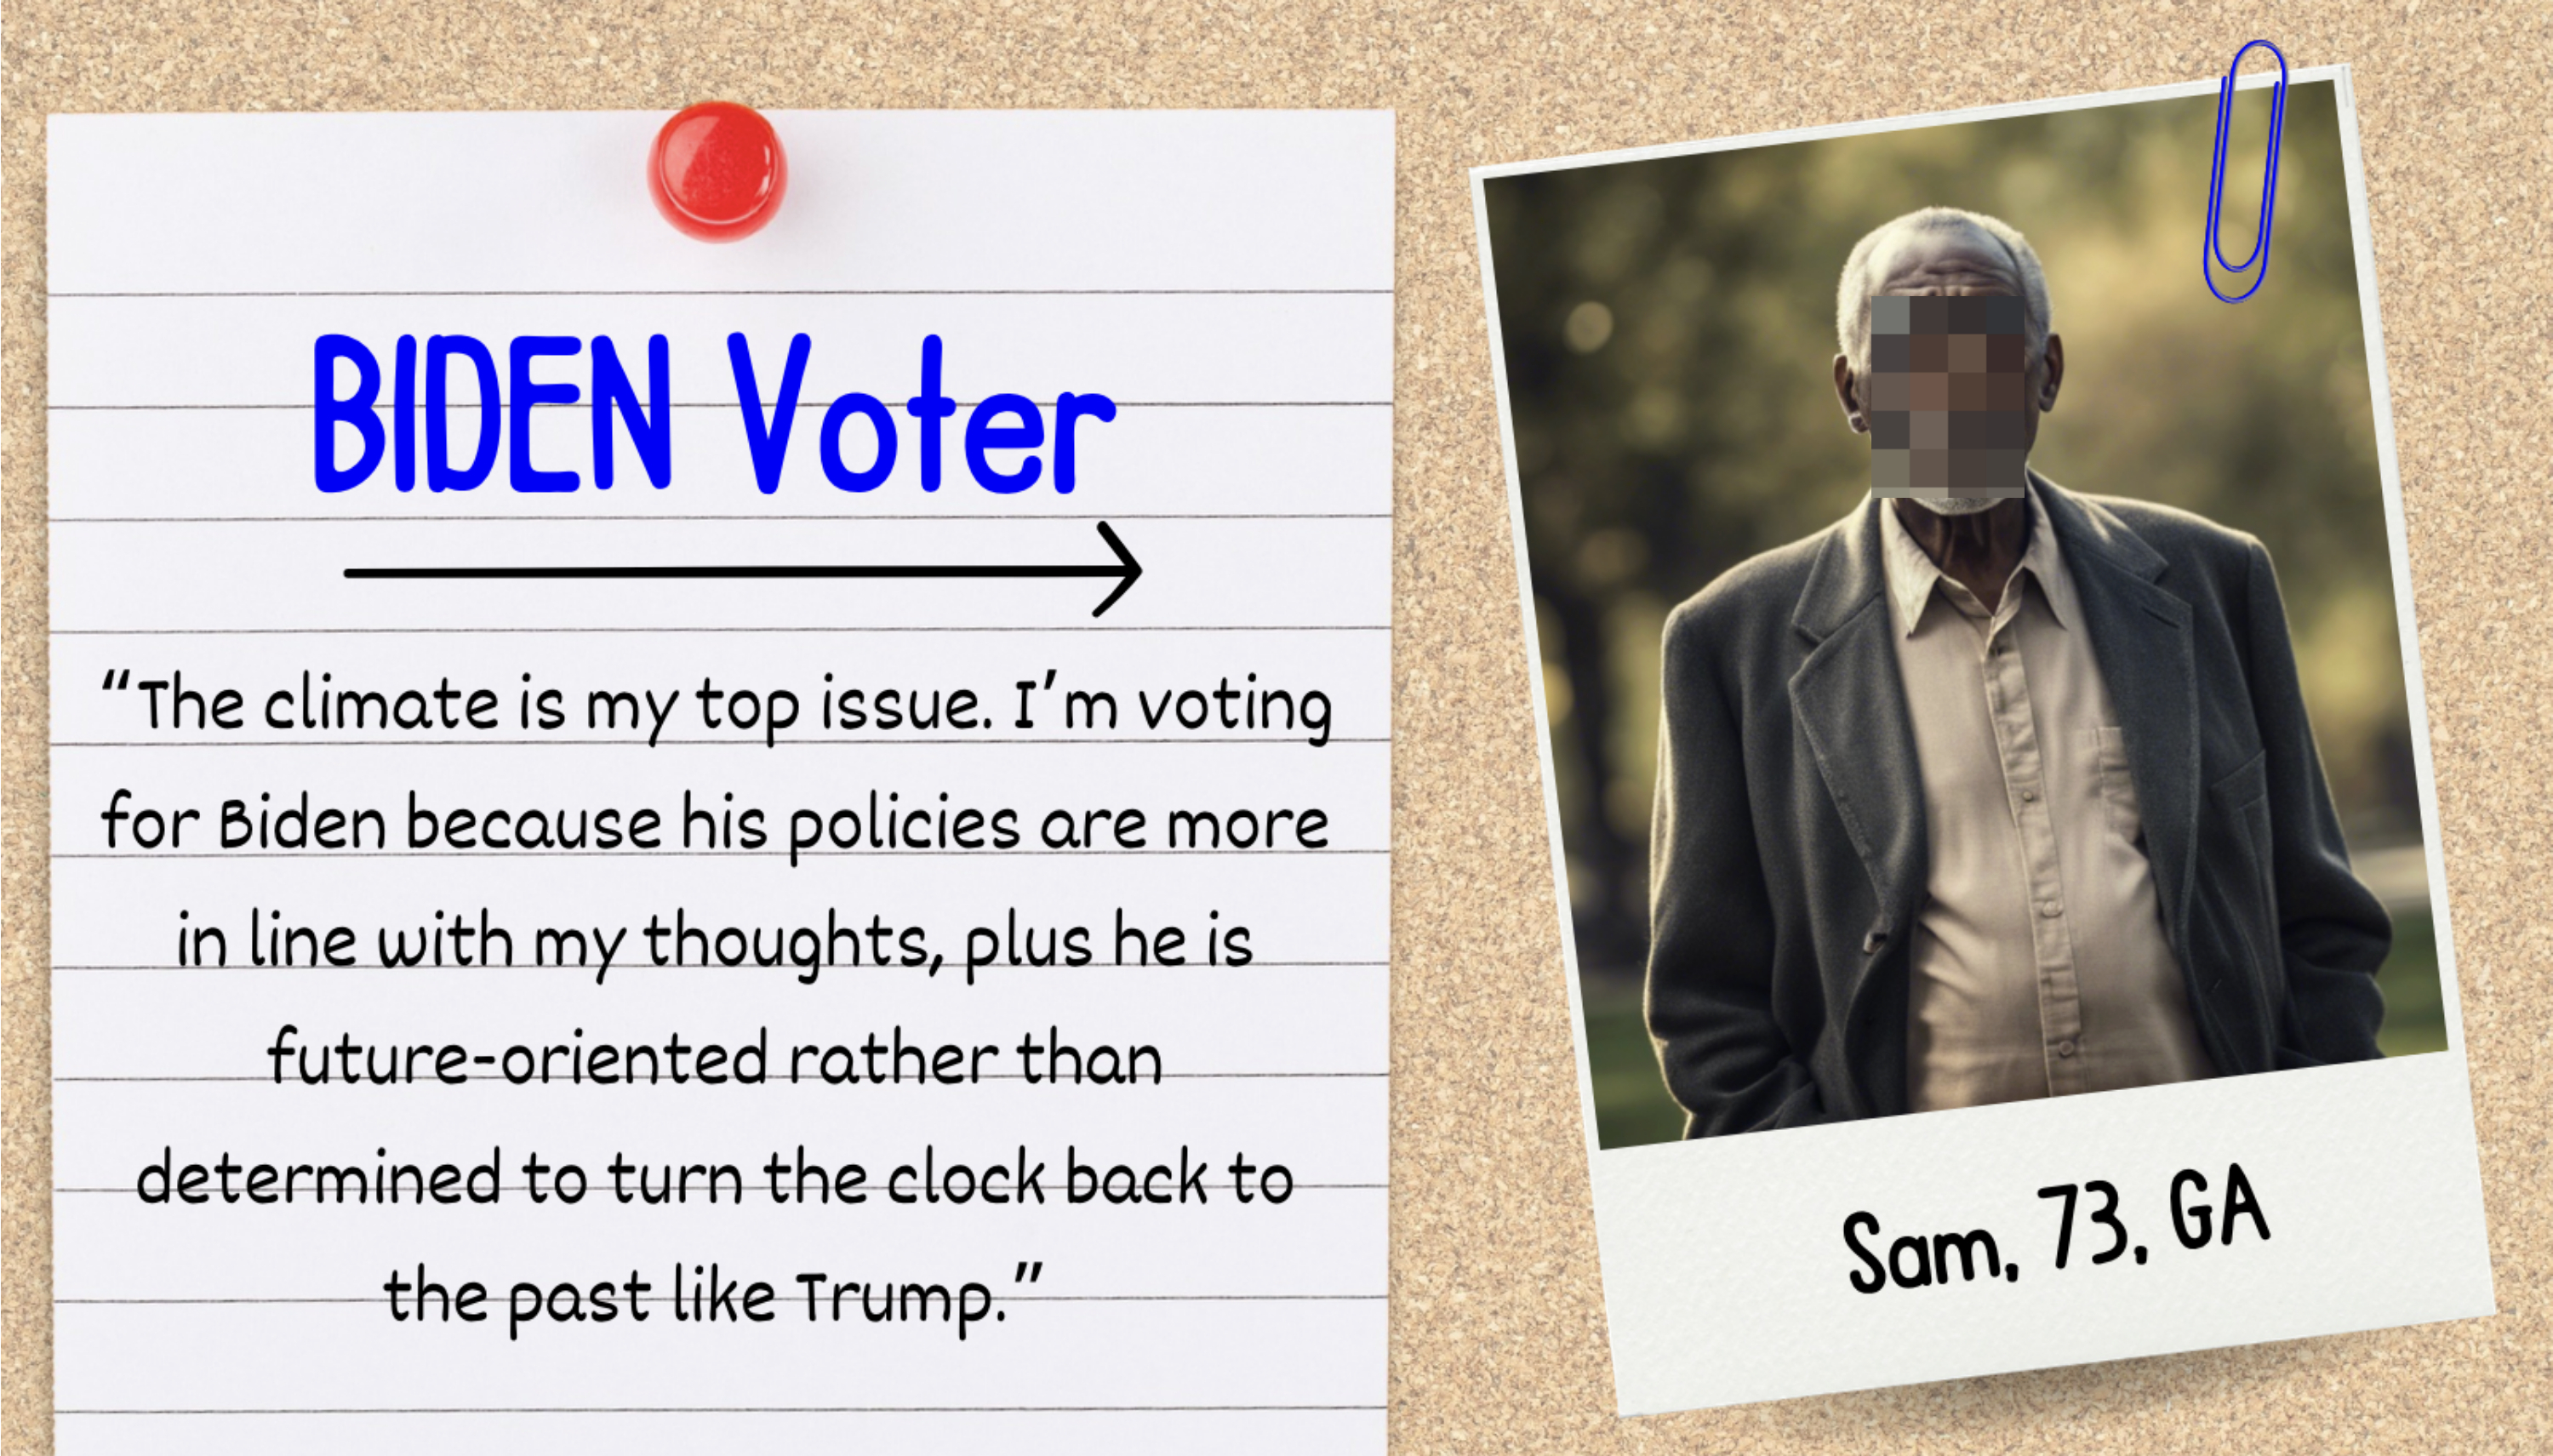 Note pinned on a board that reads &quot;BIDEN Voter&quot; with a quote about voting for Biden due to climate concerns, alongside a photo of Sam, 73, from GA